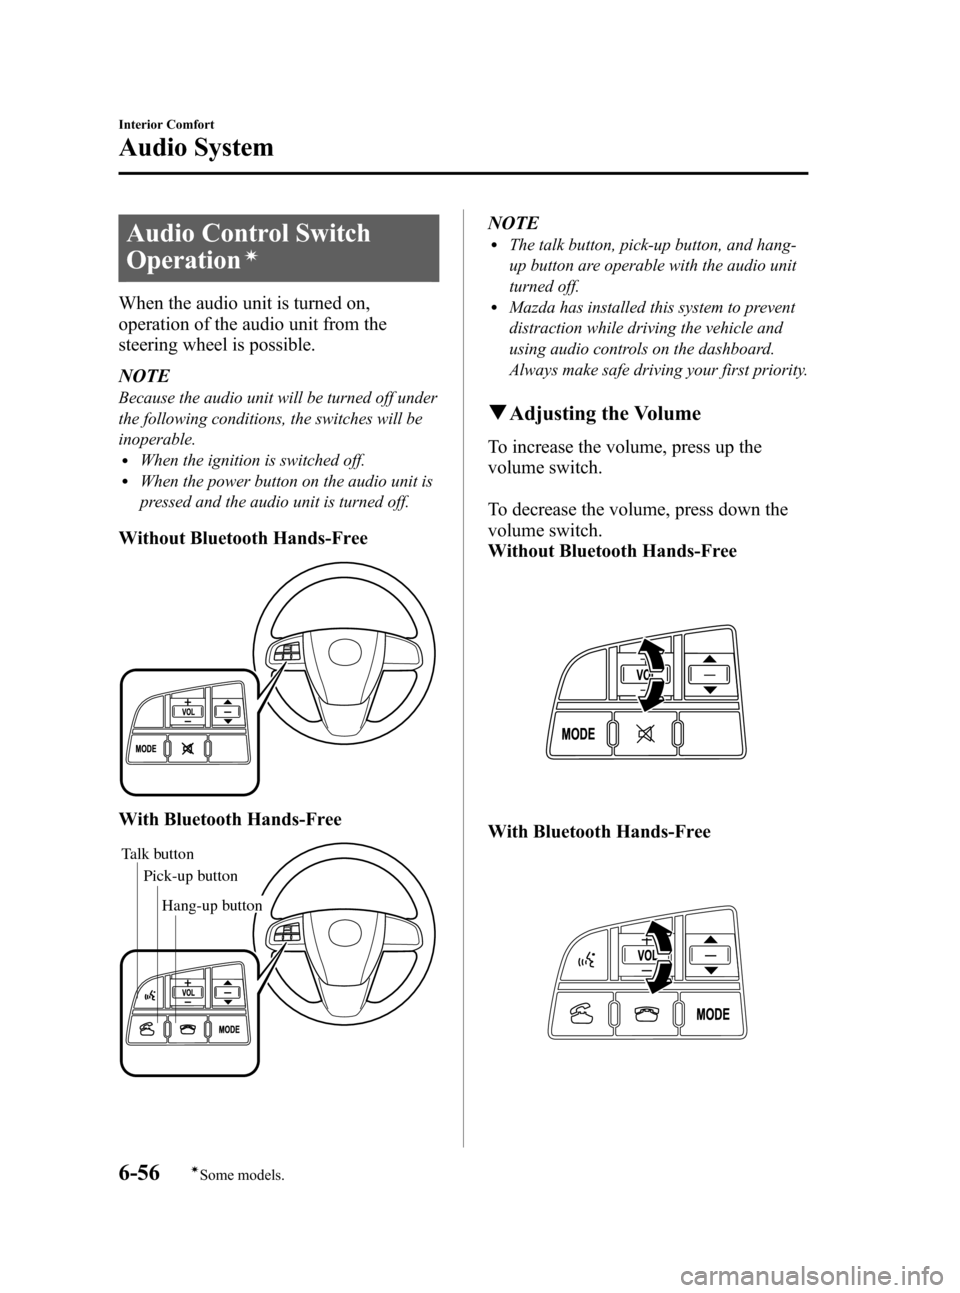 MAZDA MODEL 3 HATCHBACK 2011  Owners Manual (in English) Black plate (288,1)
Audio Control Switch
Operation
í
When the audio unit is turned on,
operation of the audio unit from the
steering wheel is possible.
NOTE
Because the audio unit will be turned off 